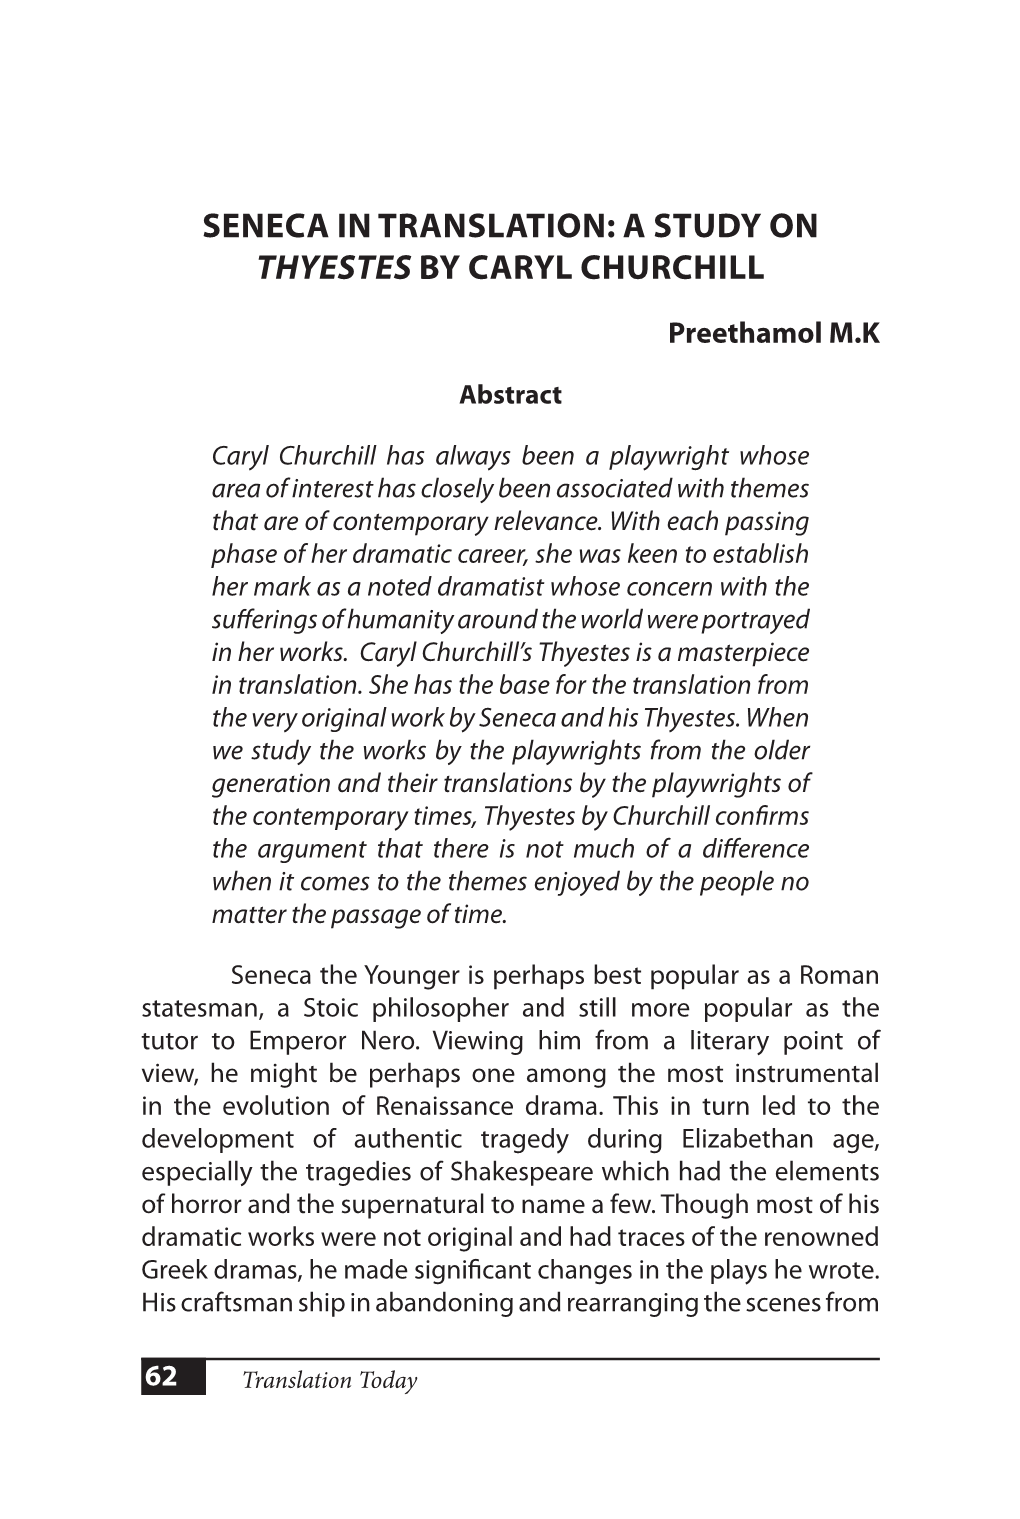 A Study on Thyestes by Caryl Churchill